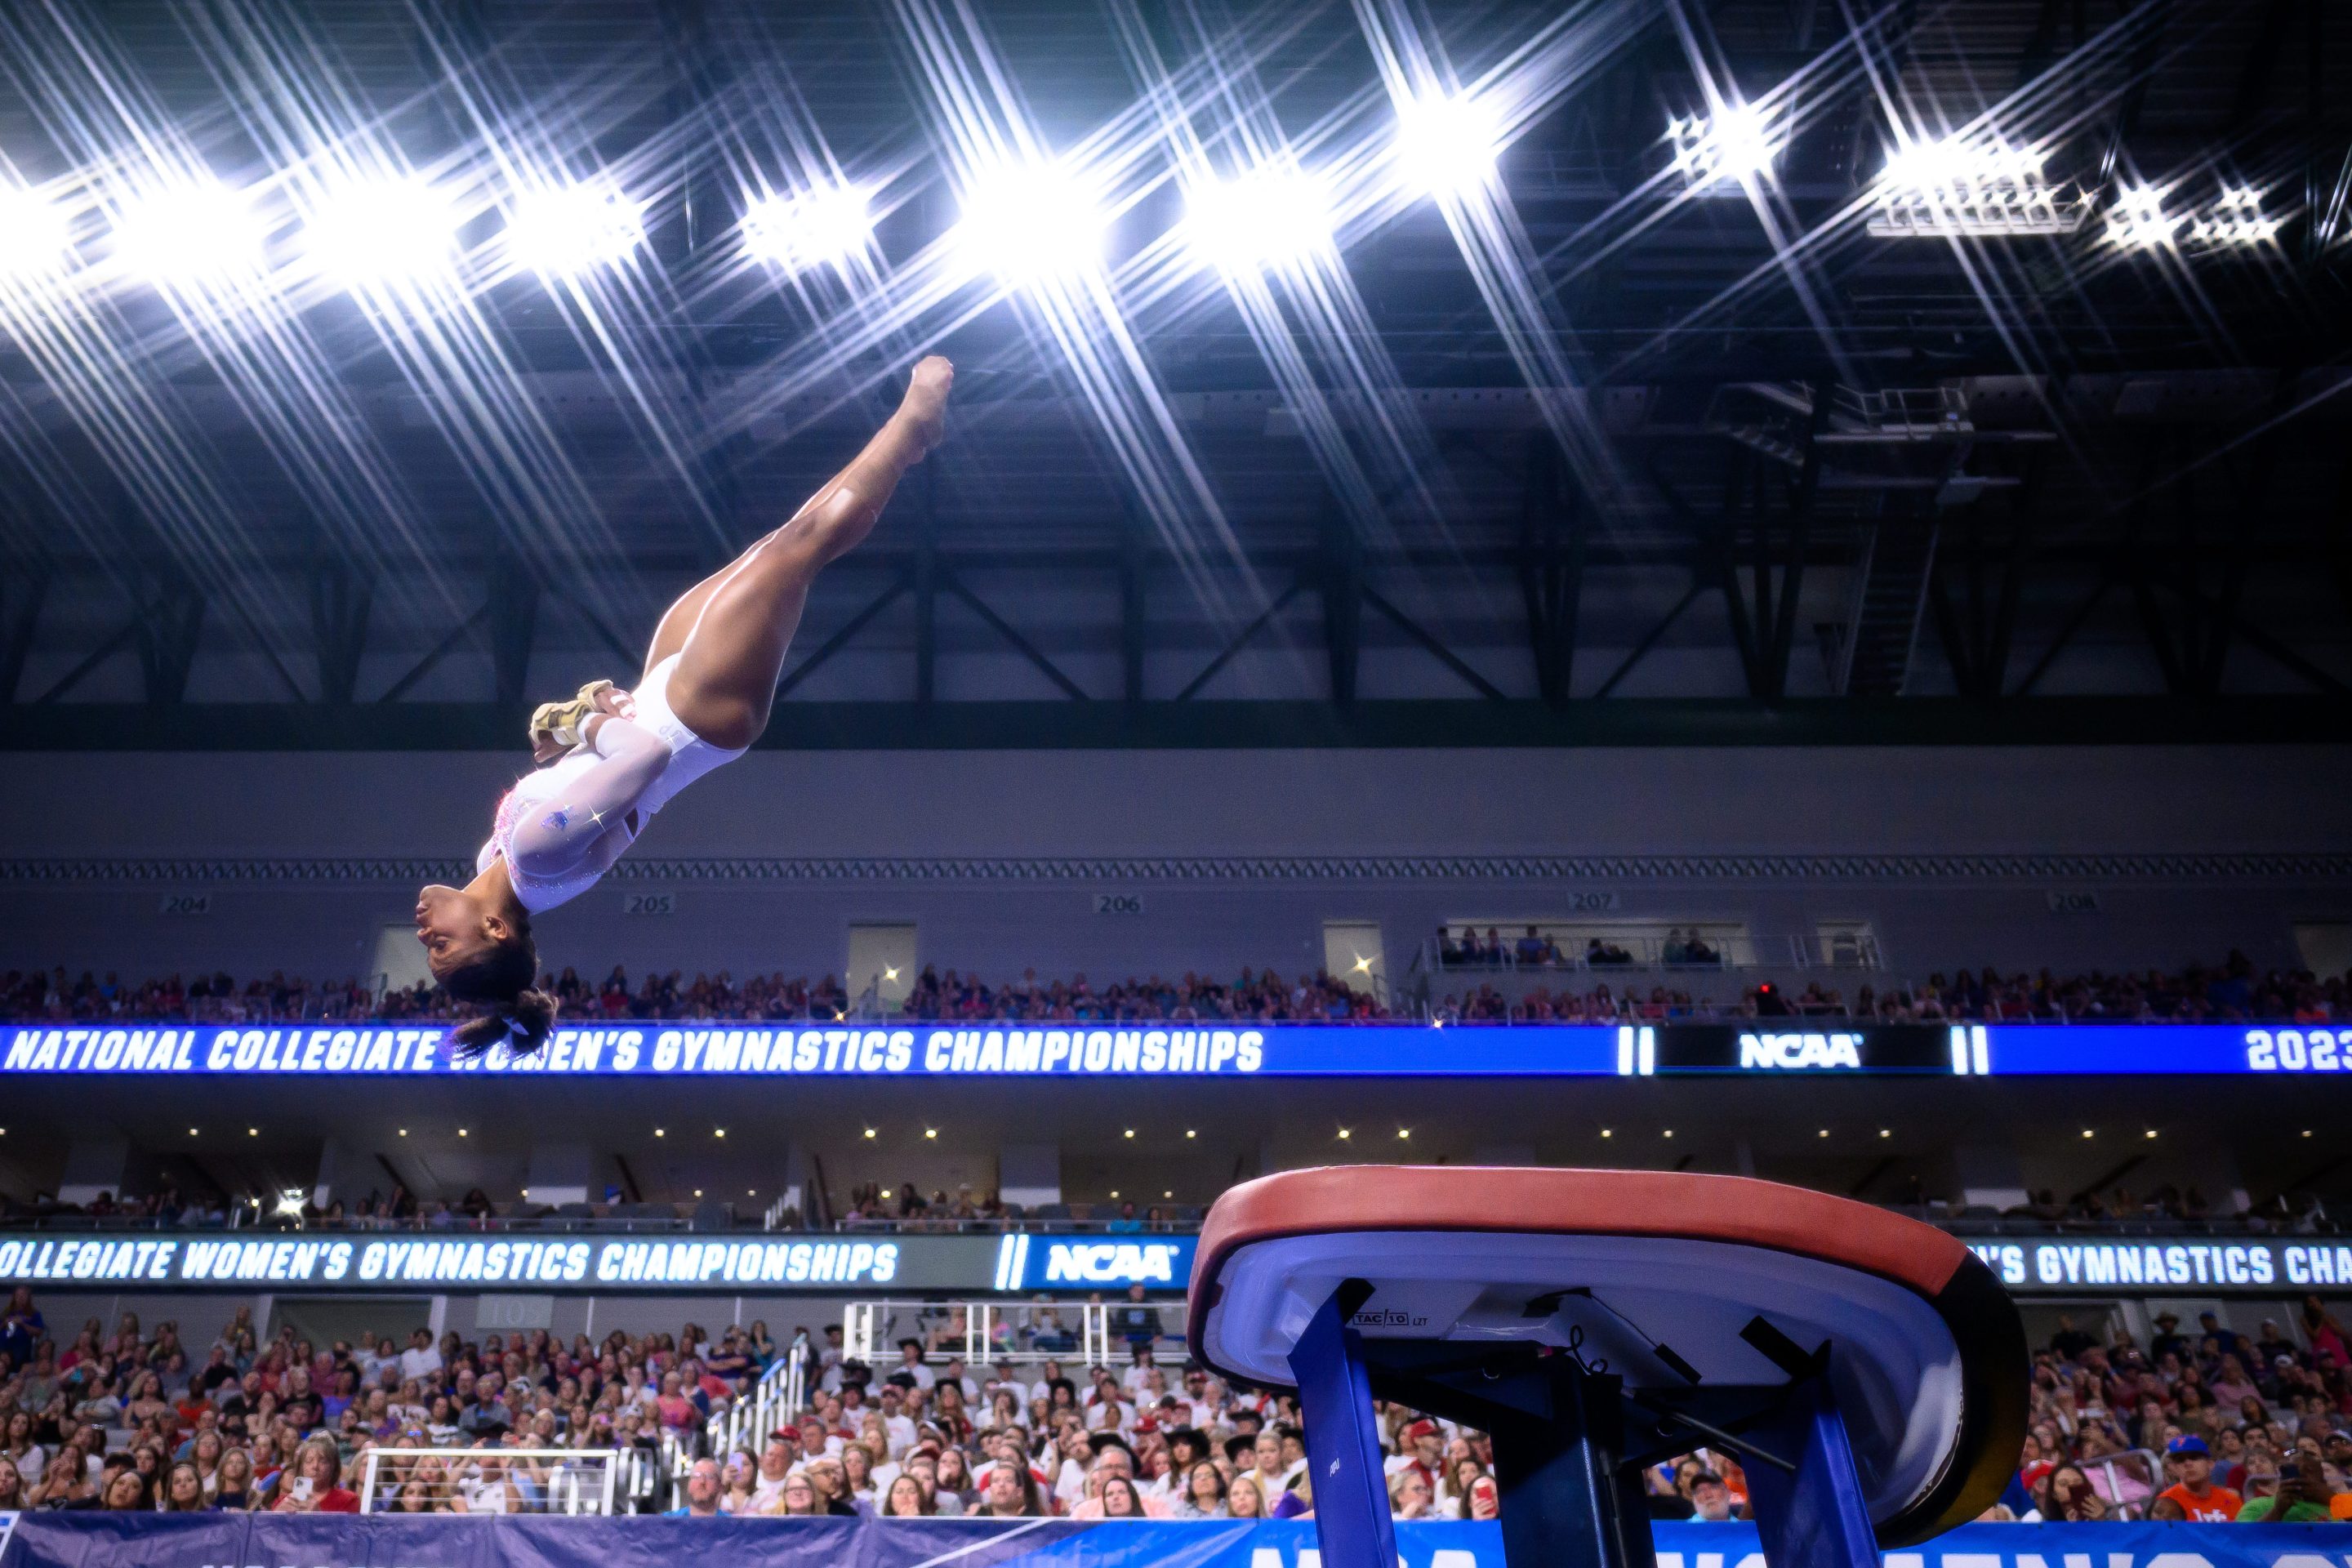 Trinity Thomas of Florida competes in the vault during the Division I Women's Gymnastics Championship held at Dickies Arena on April 15, 2023 in Fort Worth, Texas. Thomas is vaulting.